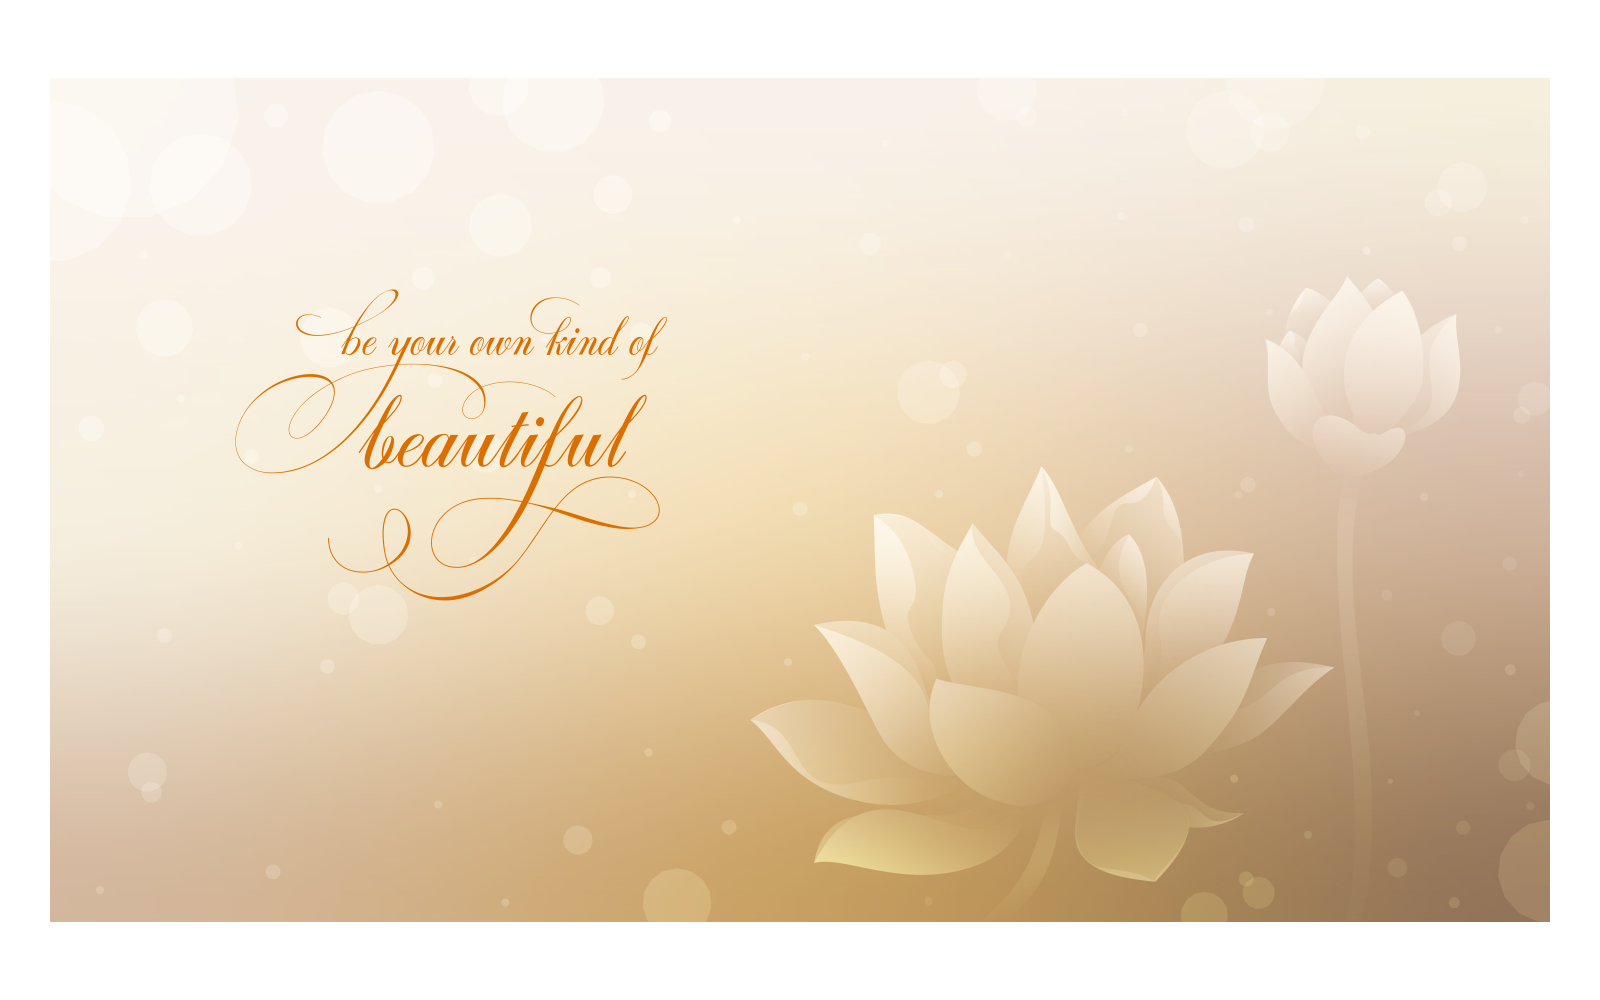 Inspirational Backgrounds 14400x8100px With Lotuses And Quote About Unique Beauty